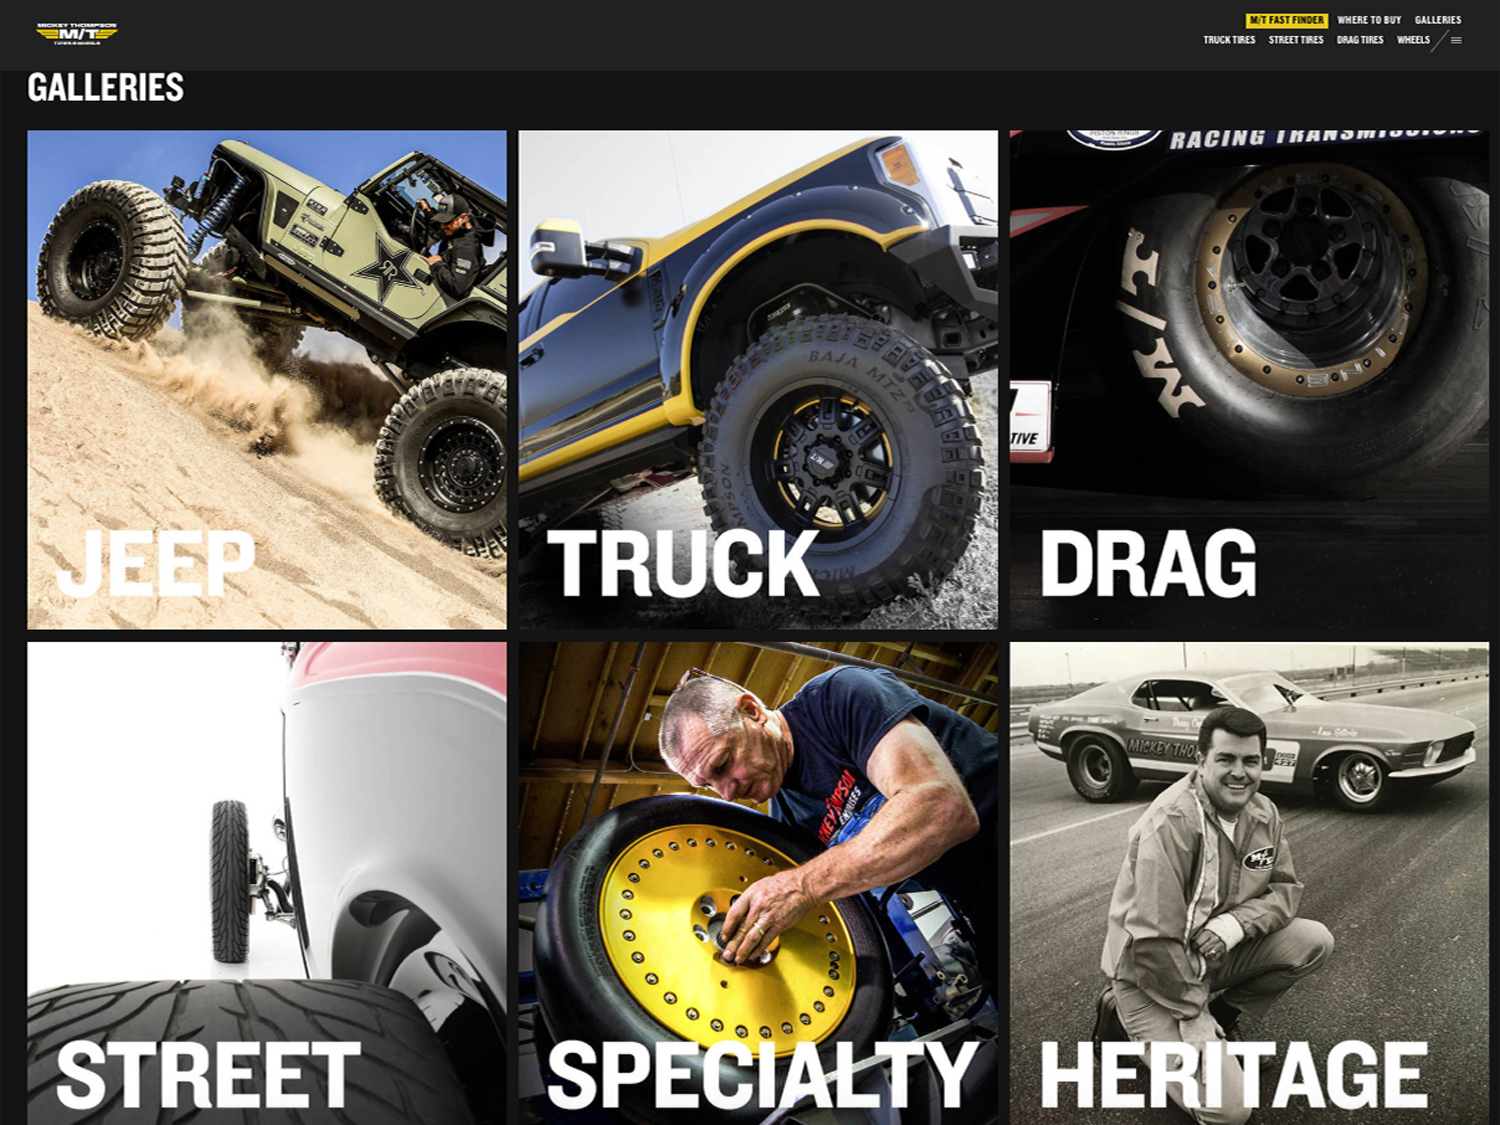 Mickey Thompson Wallpapers